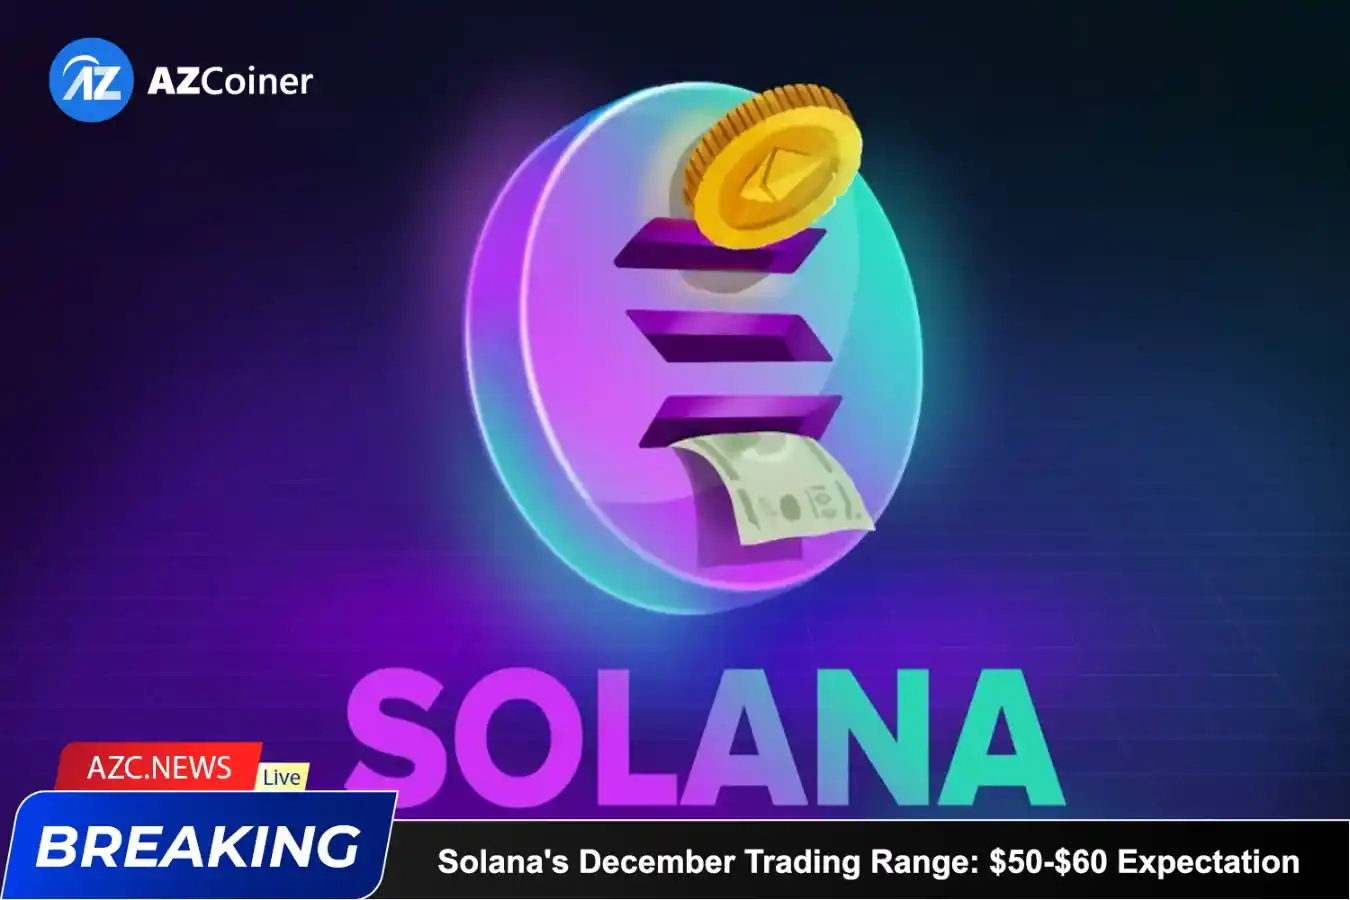 Solana’s Expected Trading Range Between $50 And $60 In December_65b971b0bd6bb.webp